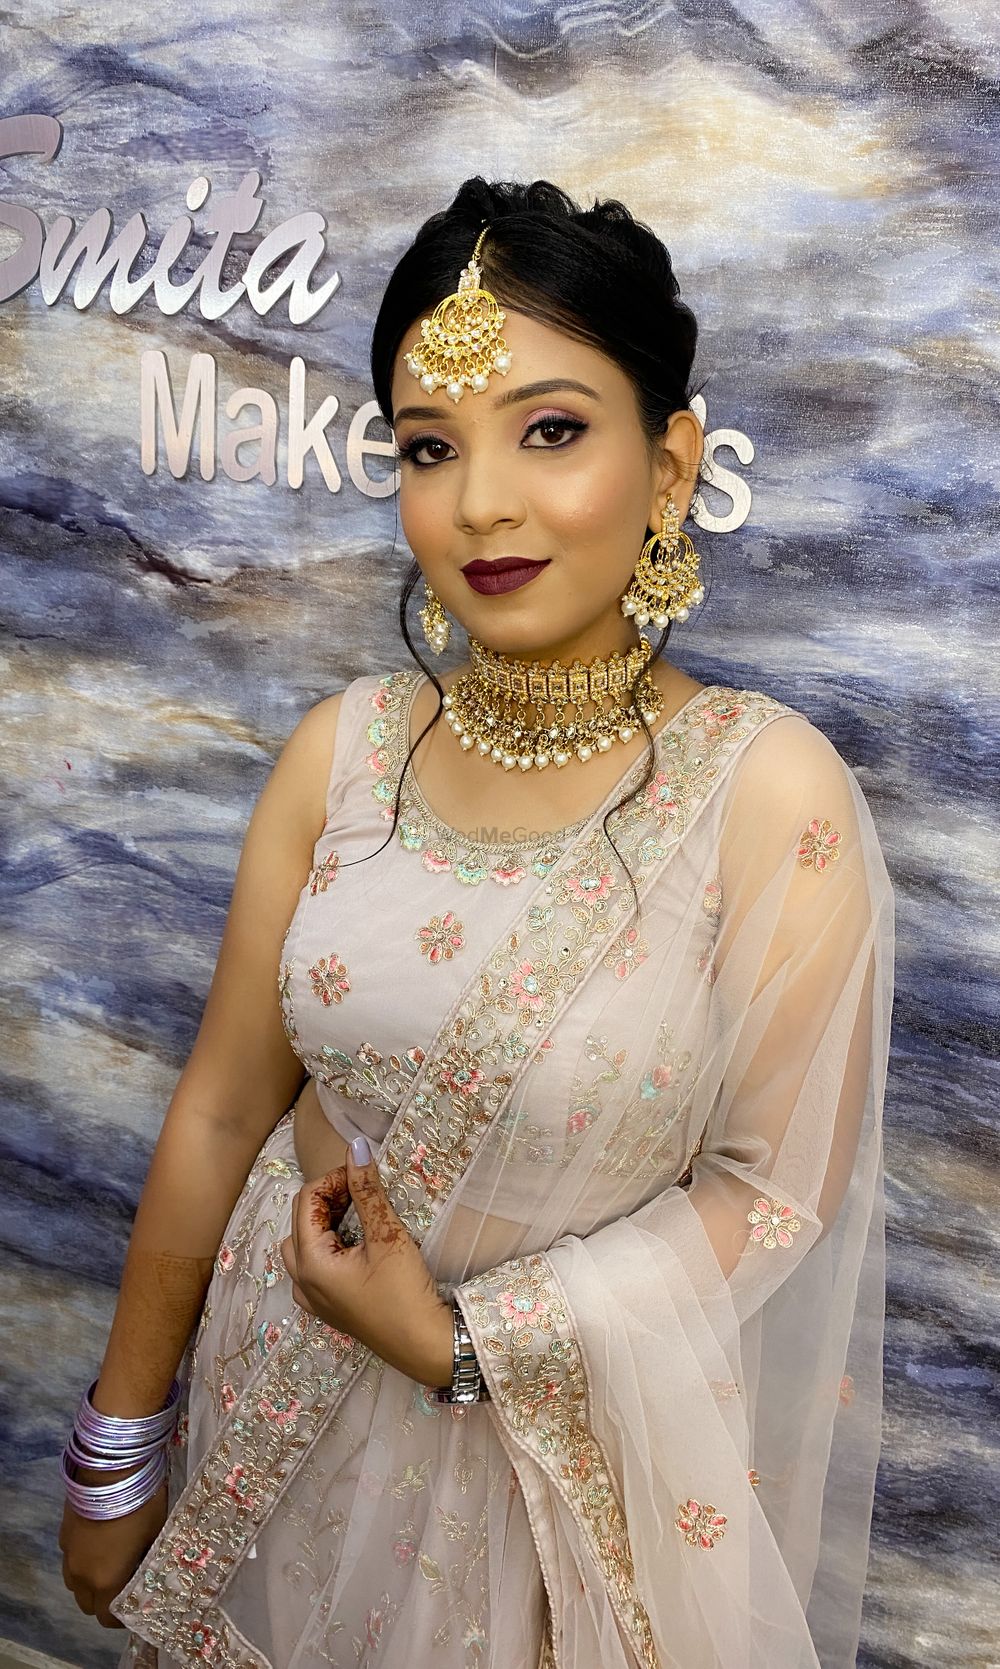 Photo From Party makeup - By Smita Makeup Artistry